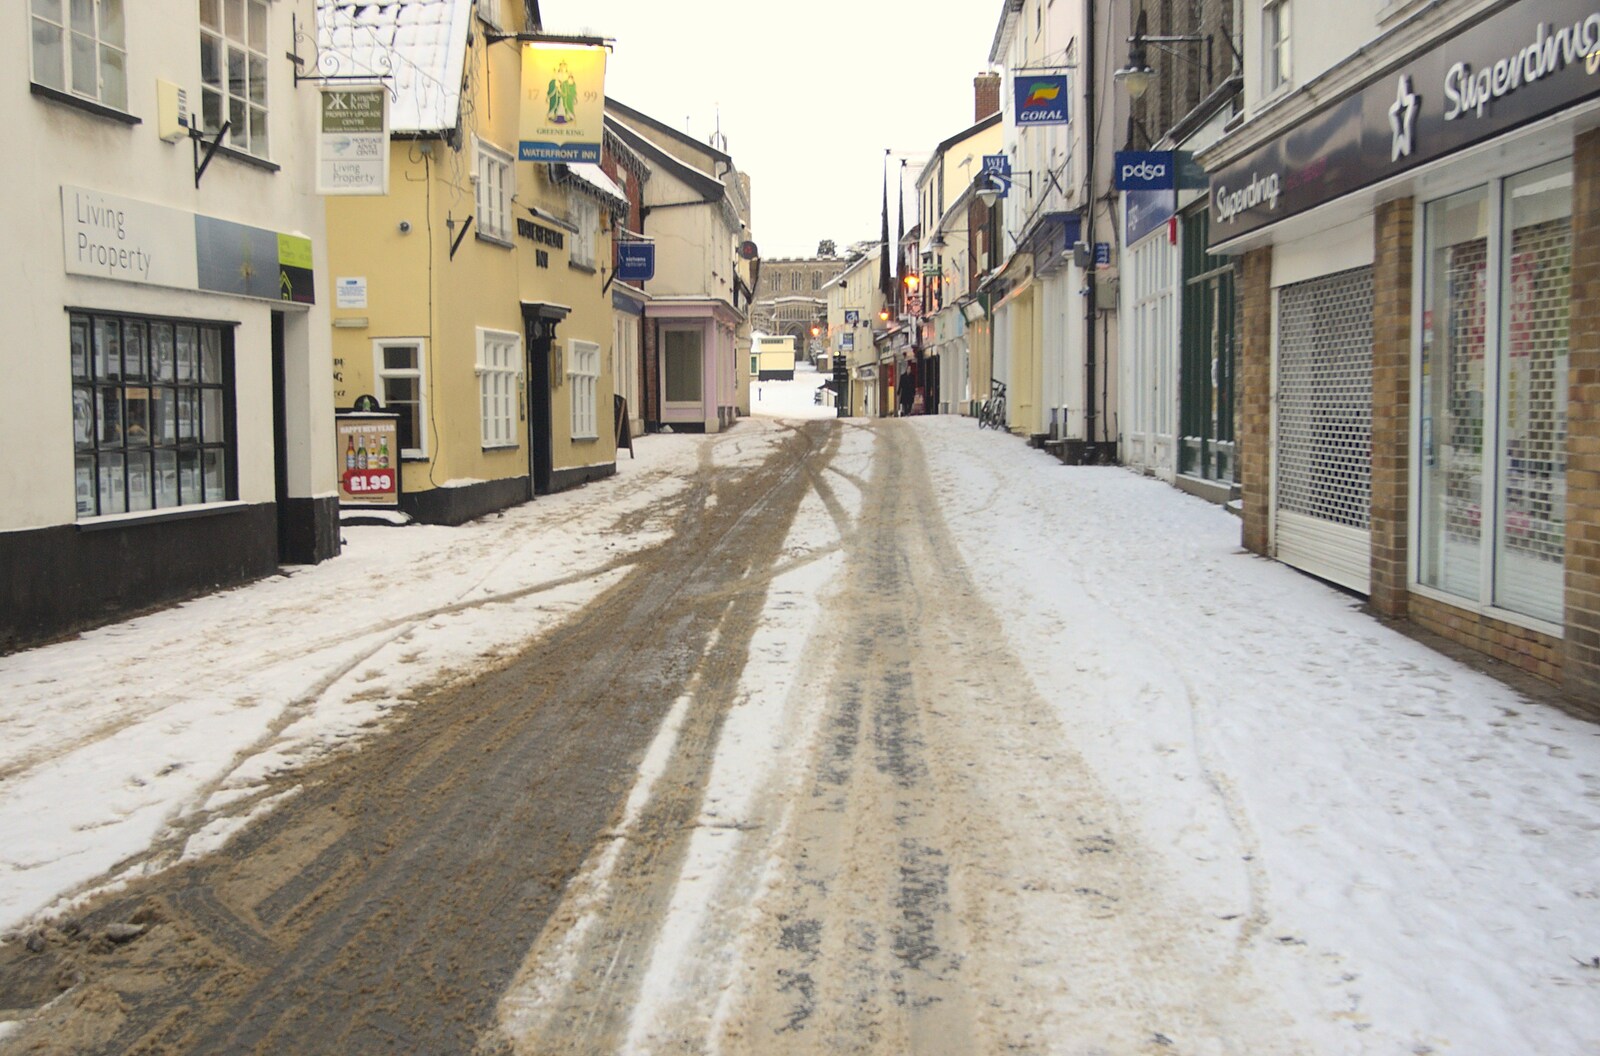 A Snowy Miscellany, Diss, Norfolk - 9th January 2010: Mere Street in Diss